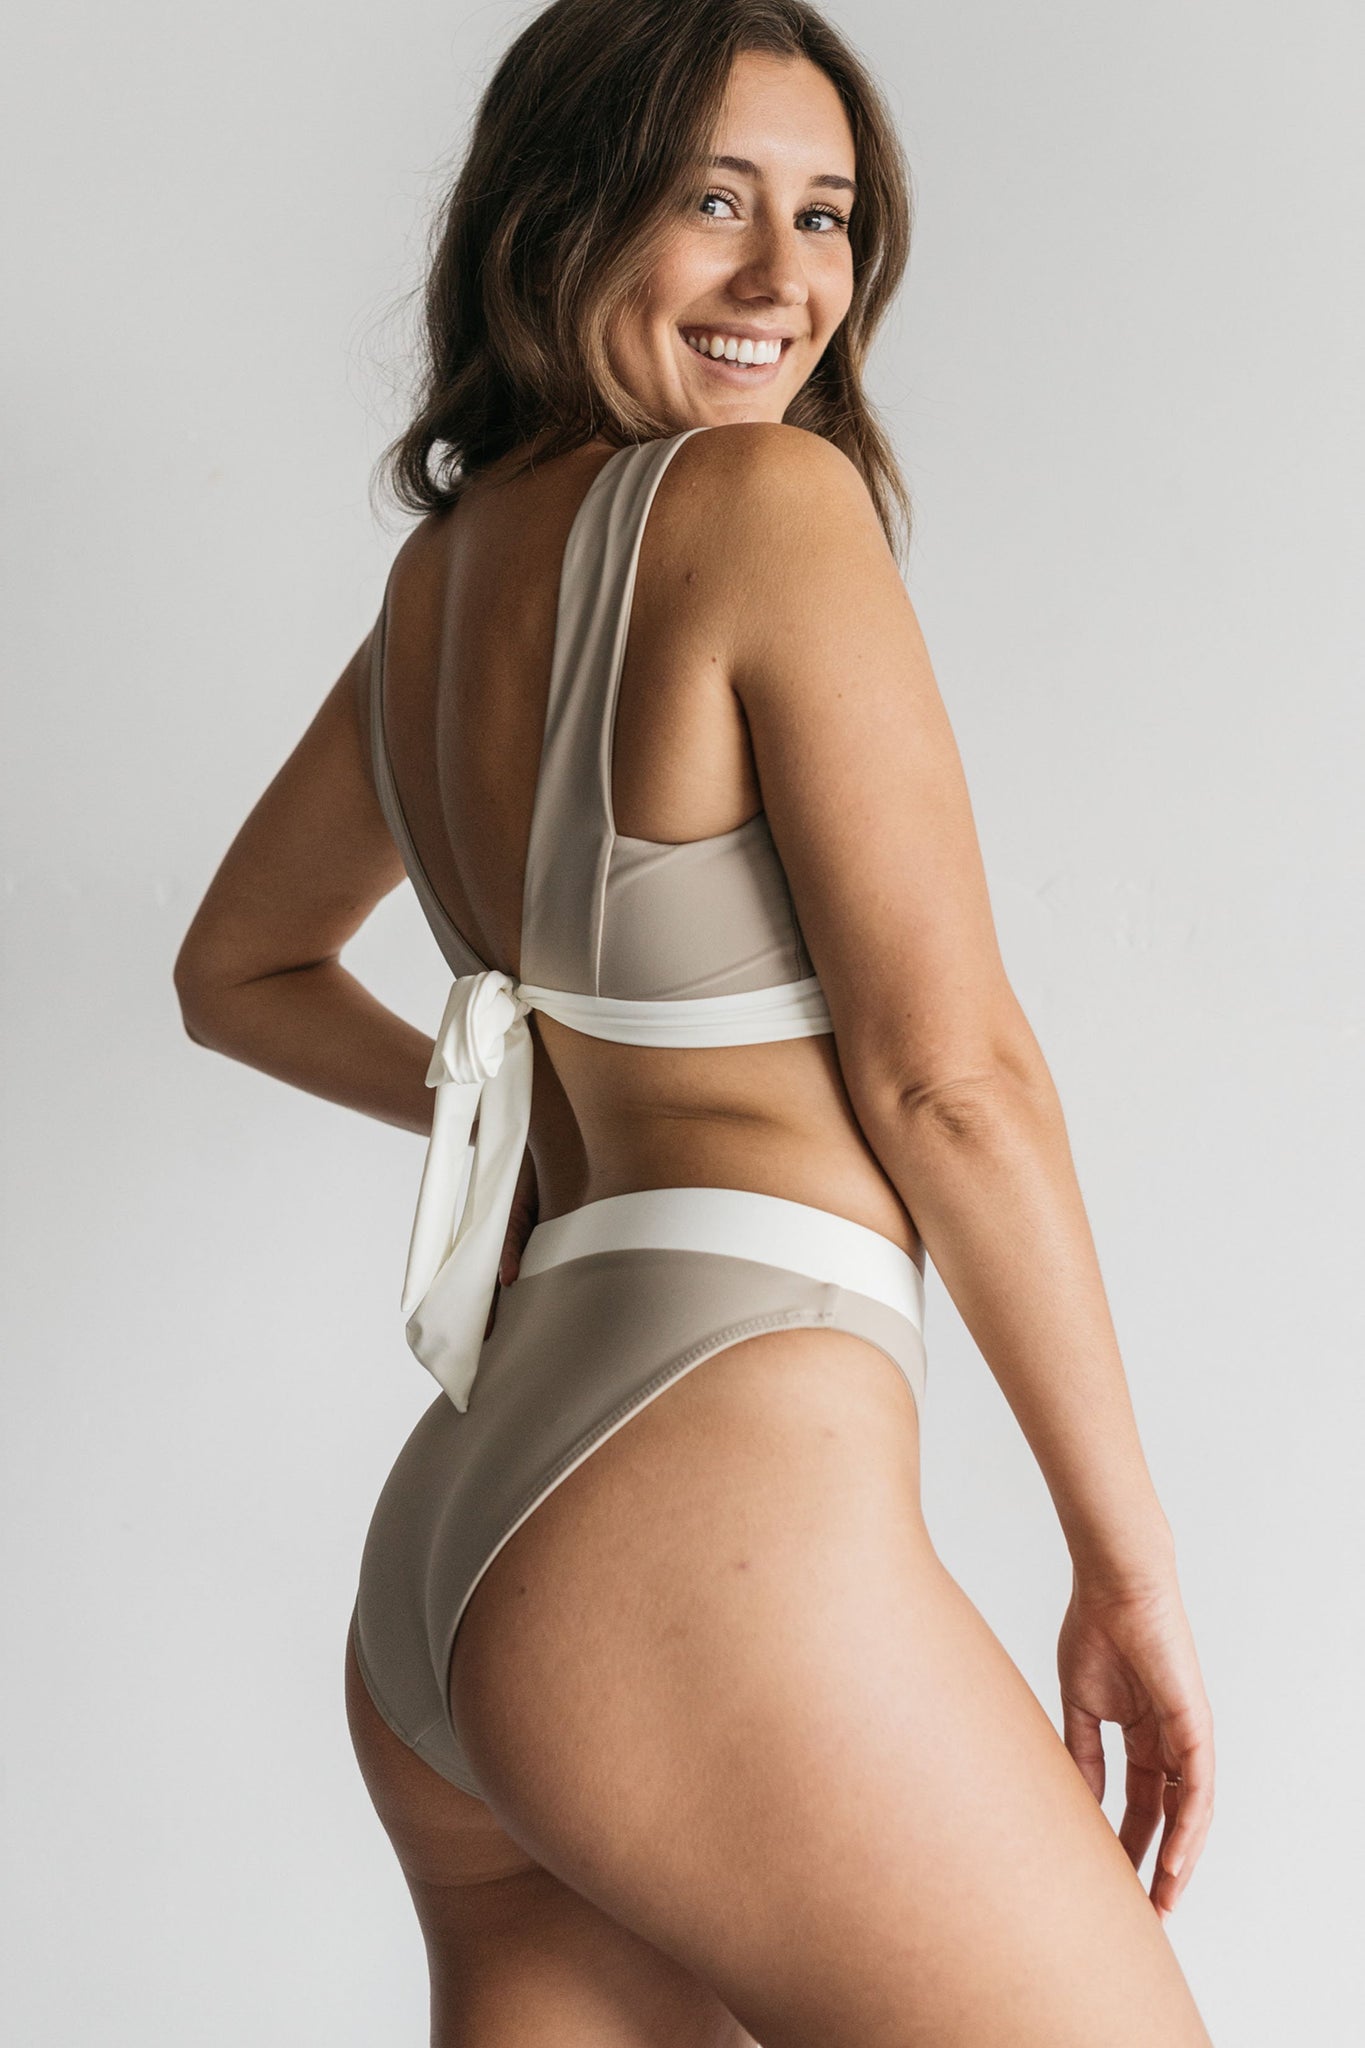 A woman standing in front of a white wall smiling over her shoulder wearing nude high waisted bikini bottoms with a white waistband and a matching nude bikini top with a white adjustable tie.